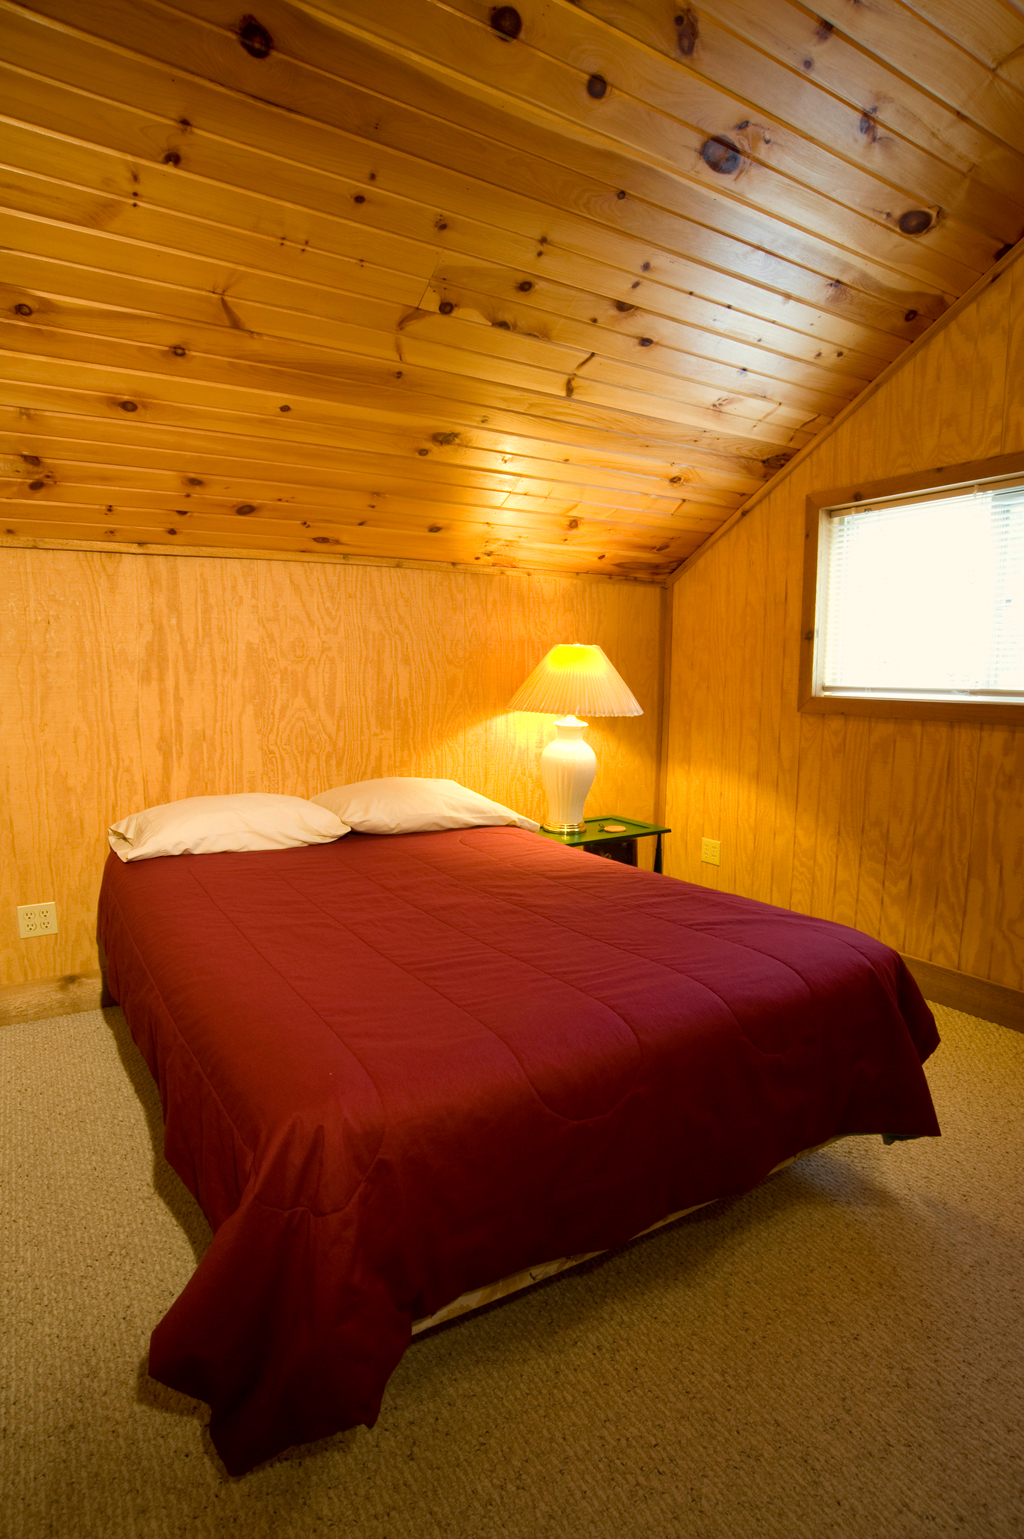 one of the loft bedrooms